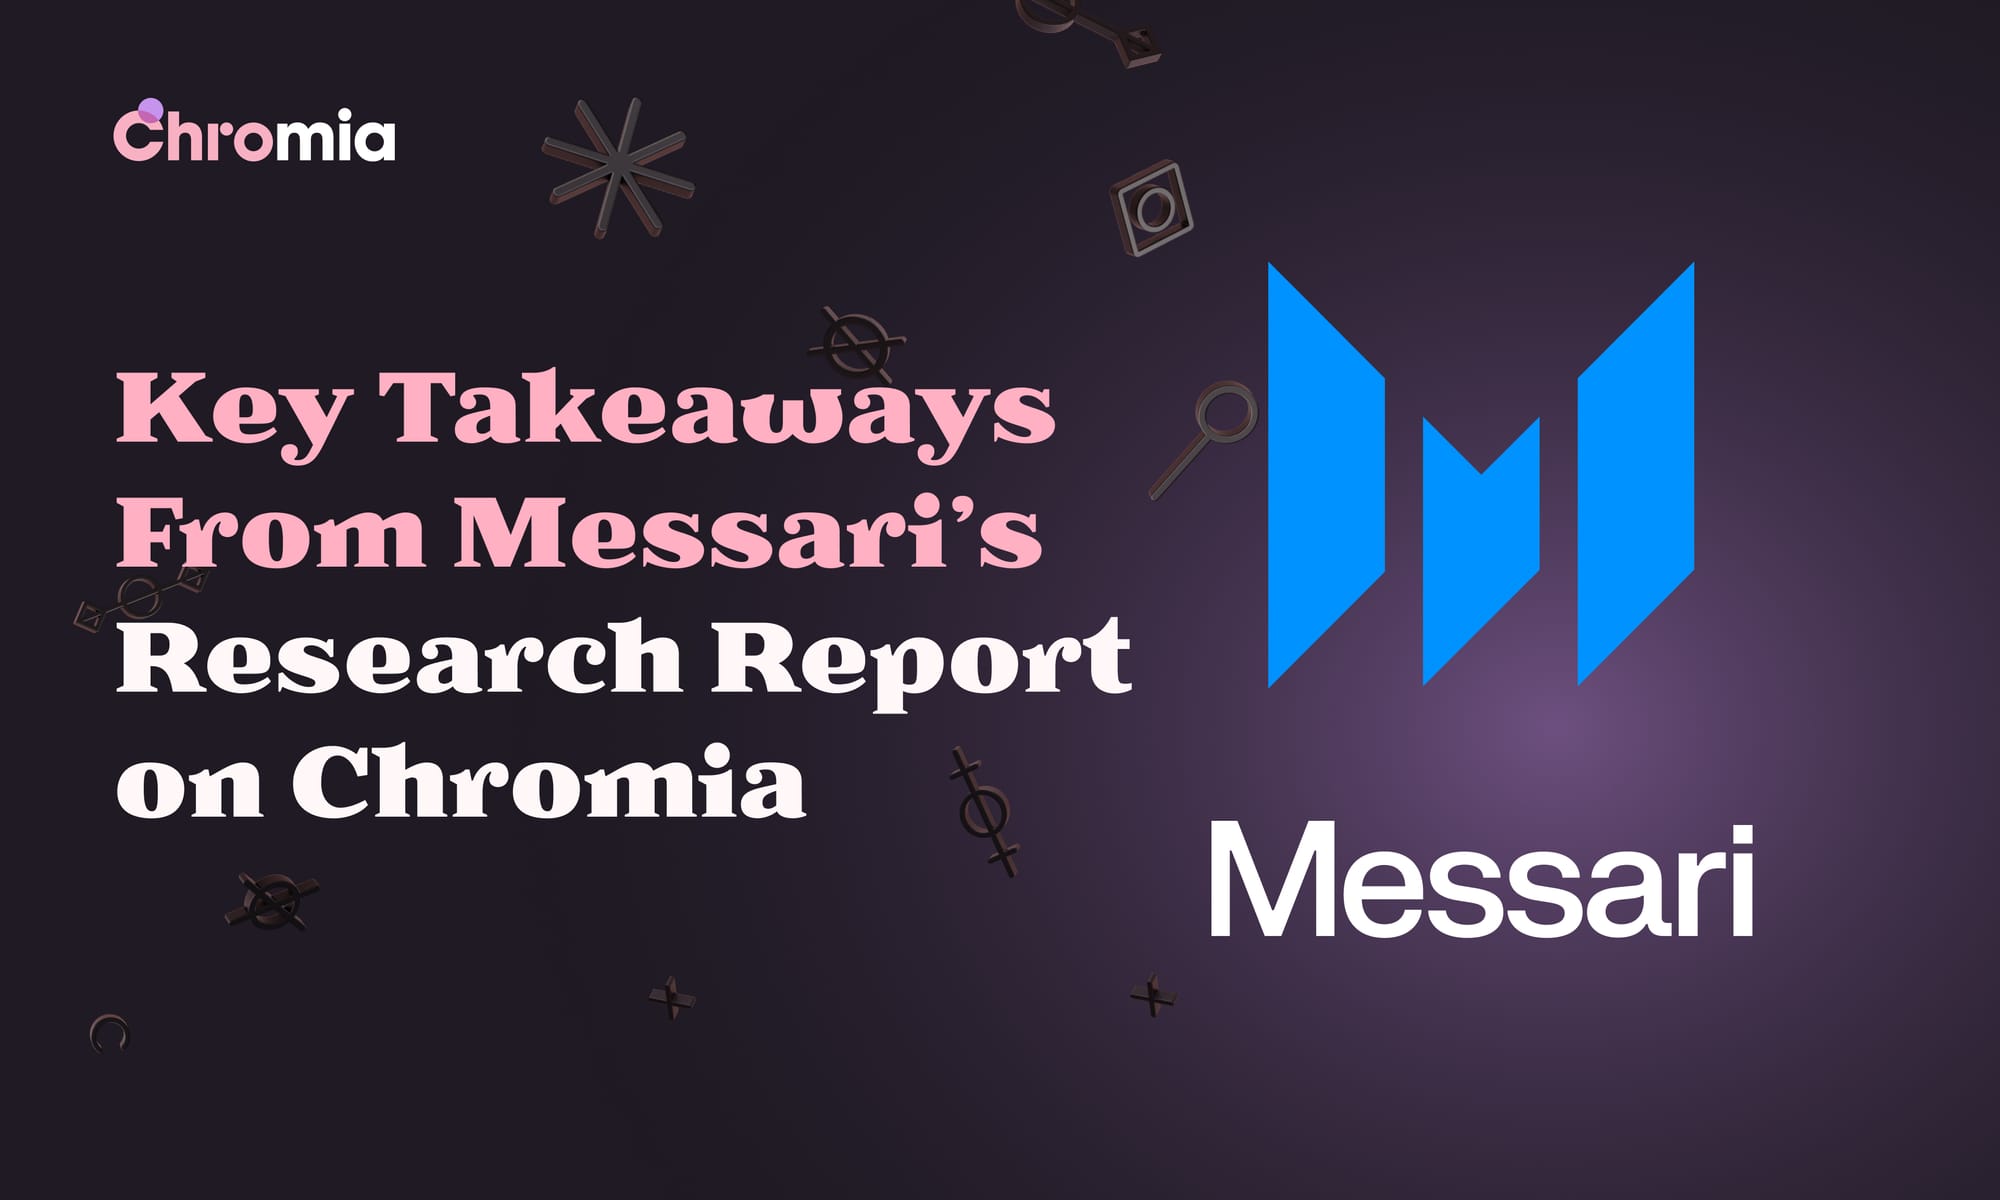 Key Takeaways From Messari’s Research Report on Chromia